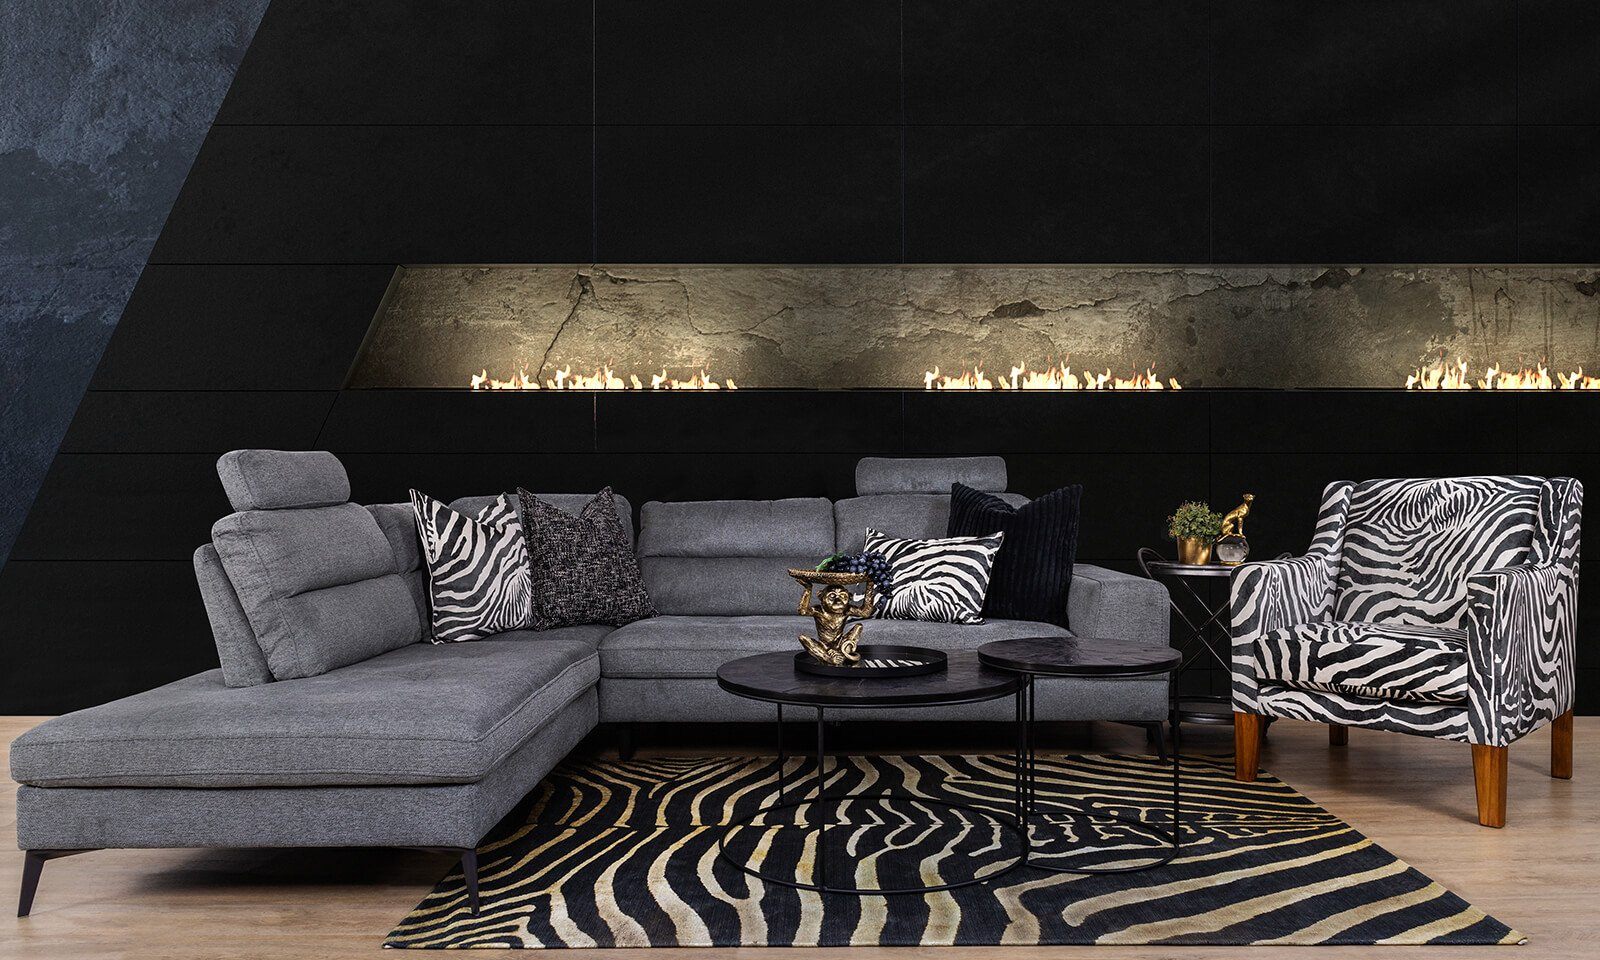 HOW TO USE THE SAFARI DESIGN TREND IN YOUR LIVING ROOM